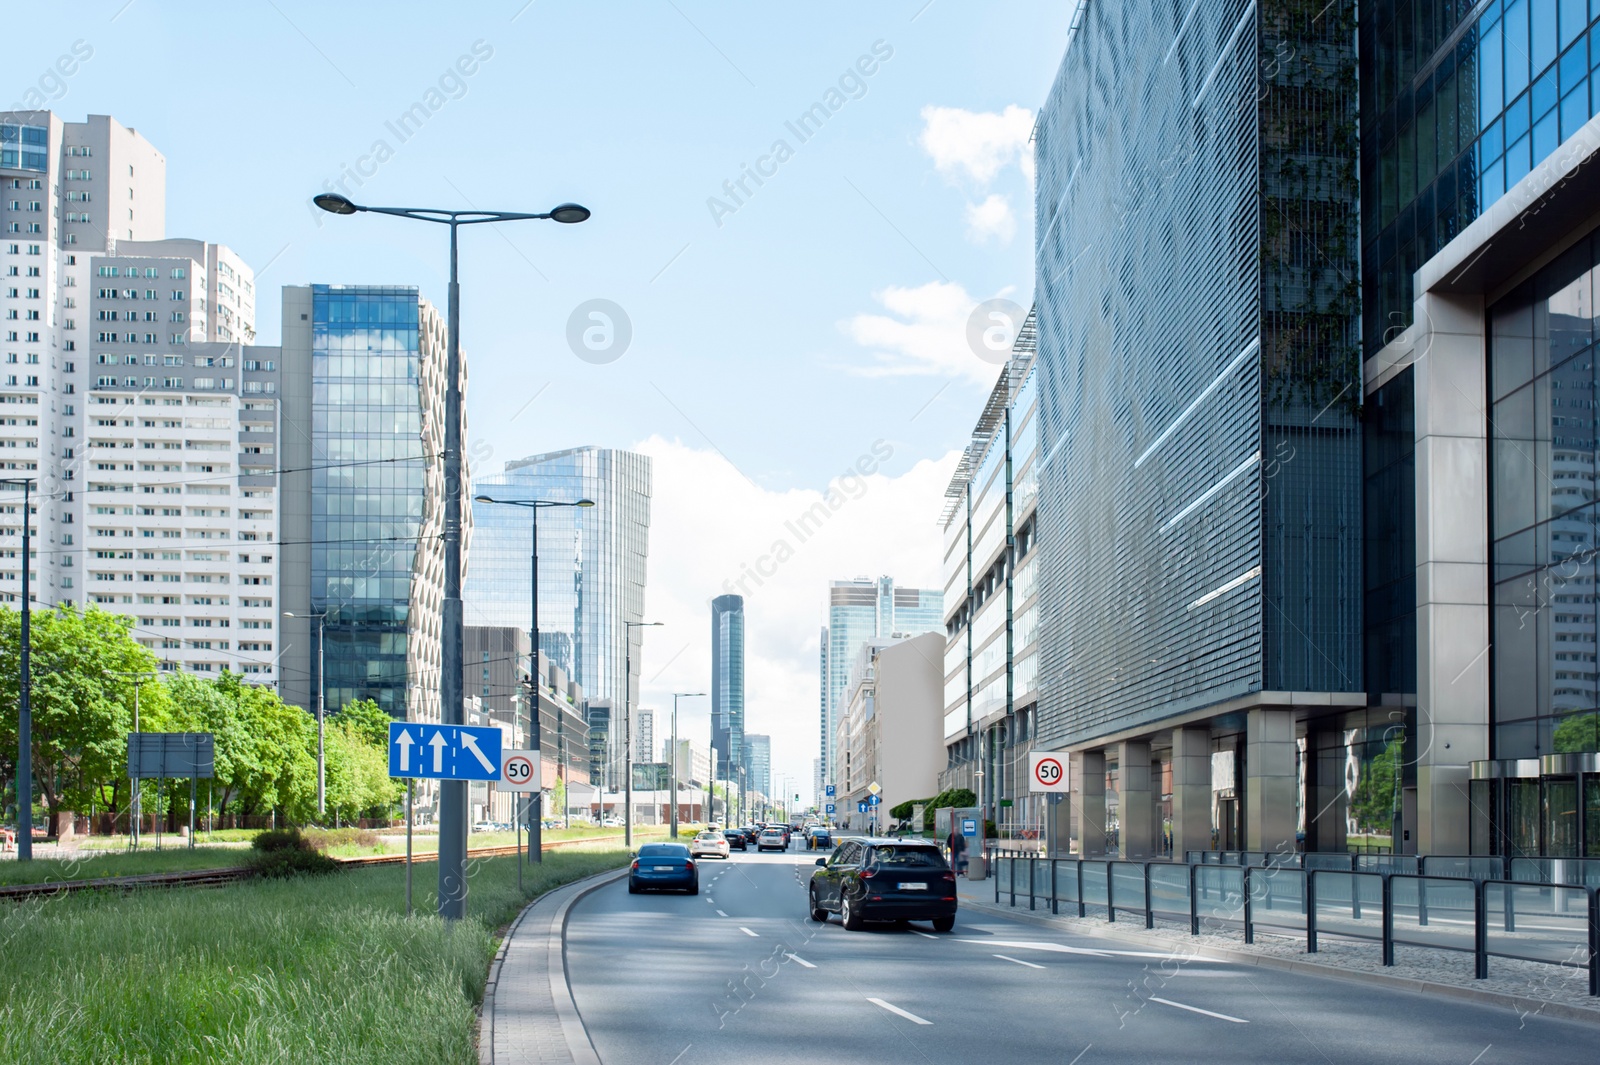 Photo of Road, cars and beautiful buildings on cloudy day in city